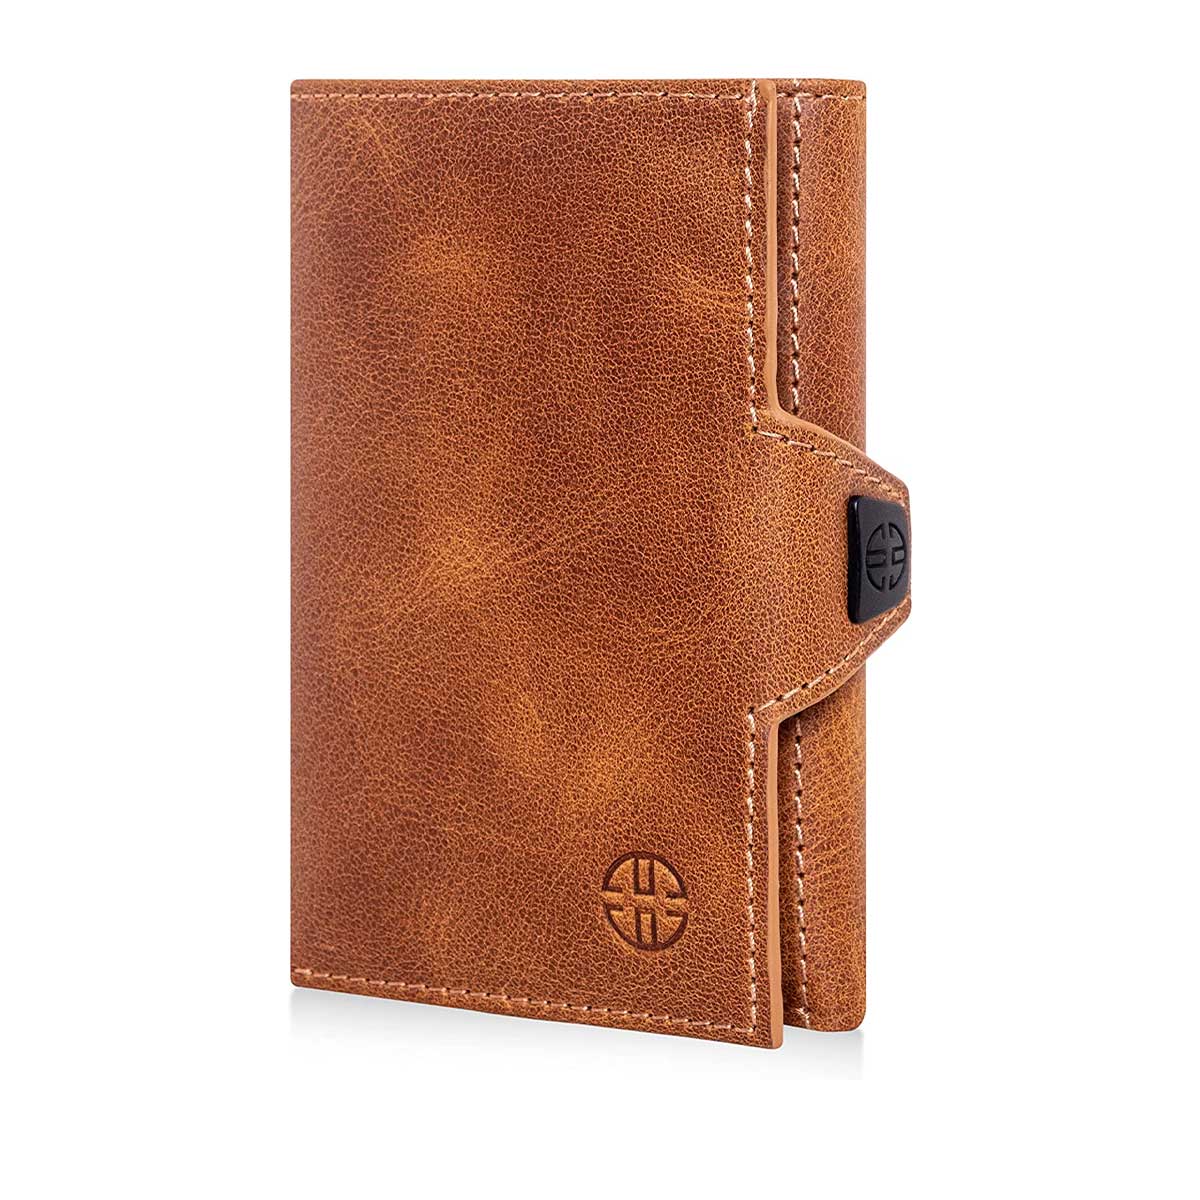 Toscana Leather Wallet Coin Pocket